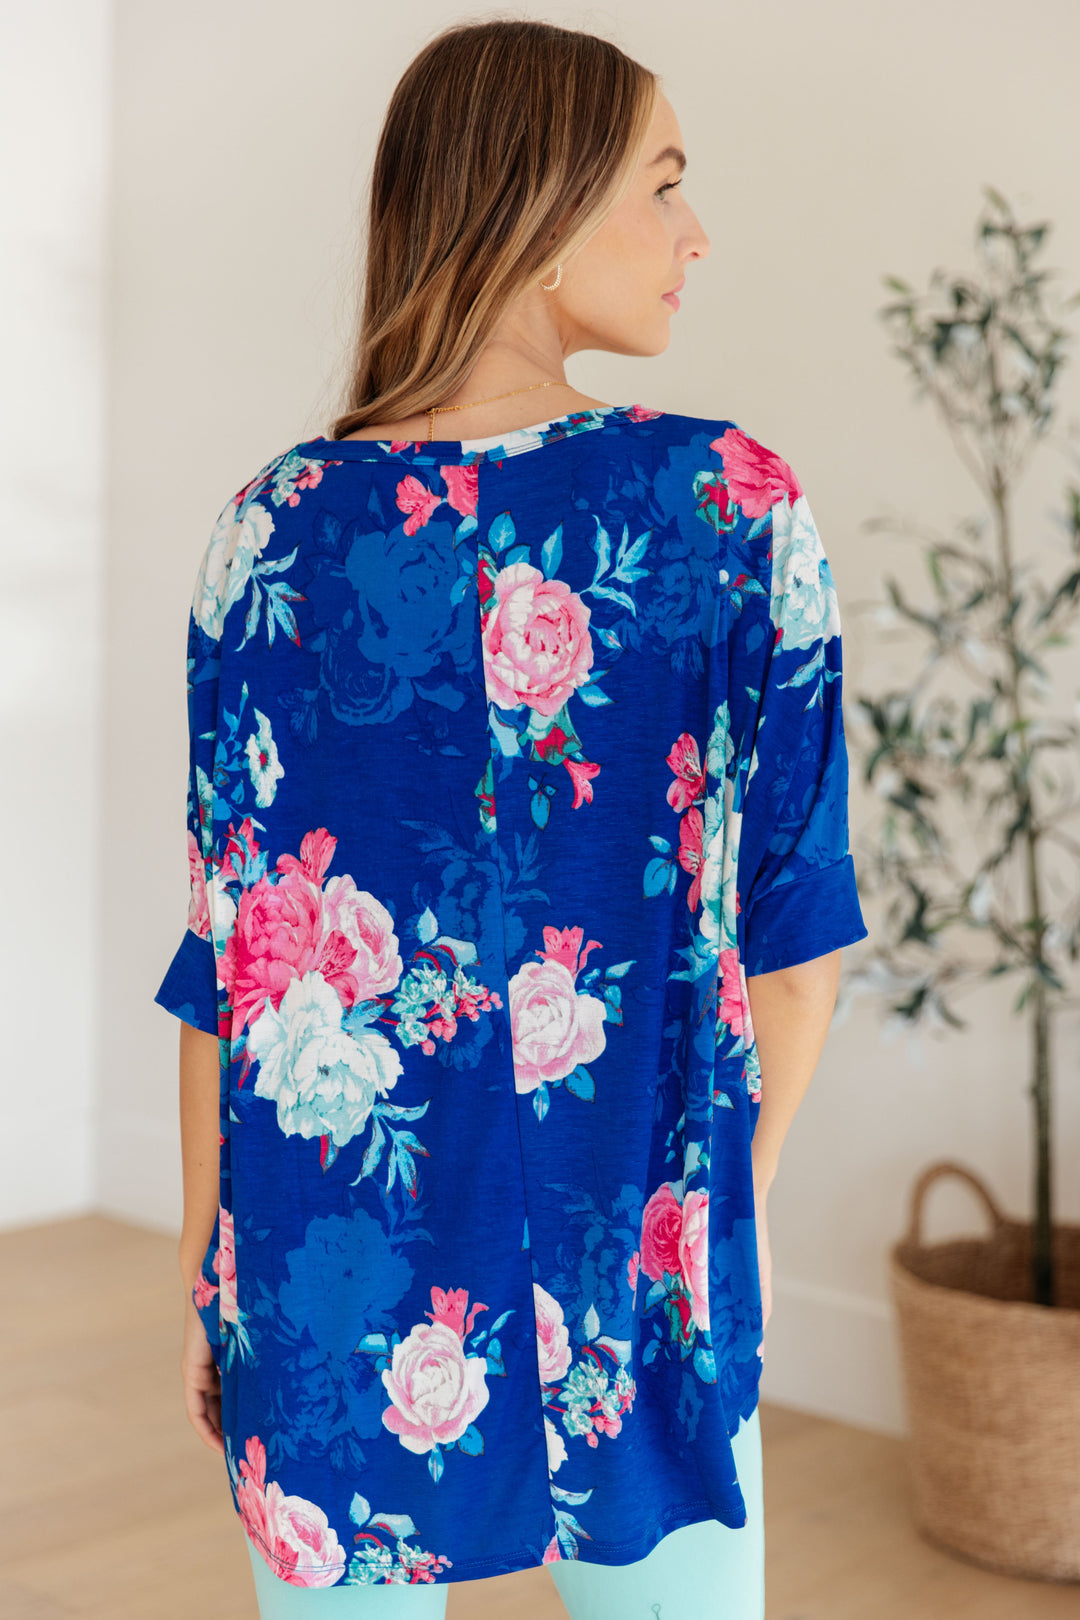 Essentially You Batwing Top - Royal and Pink Floral